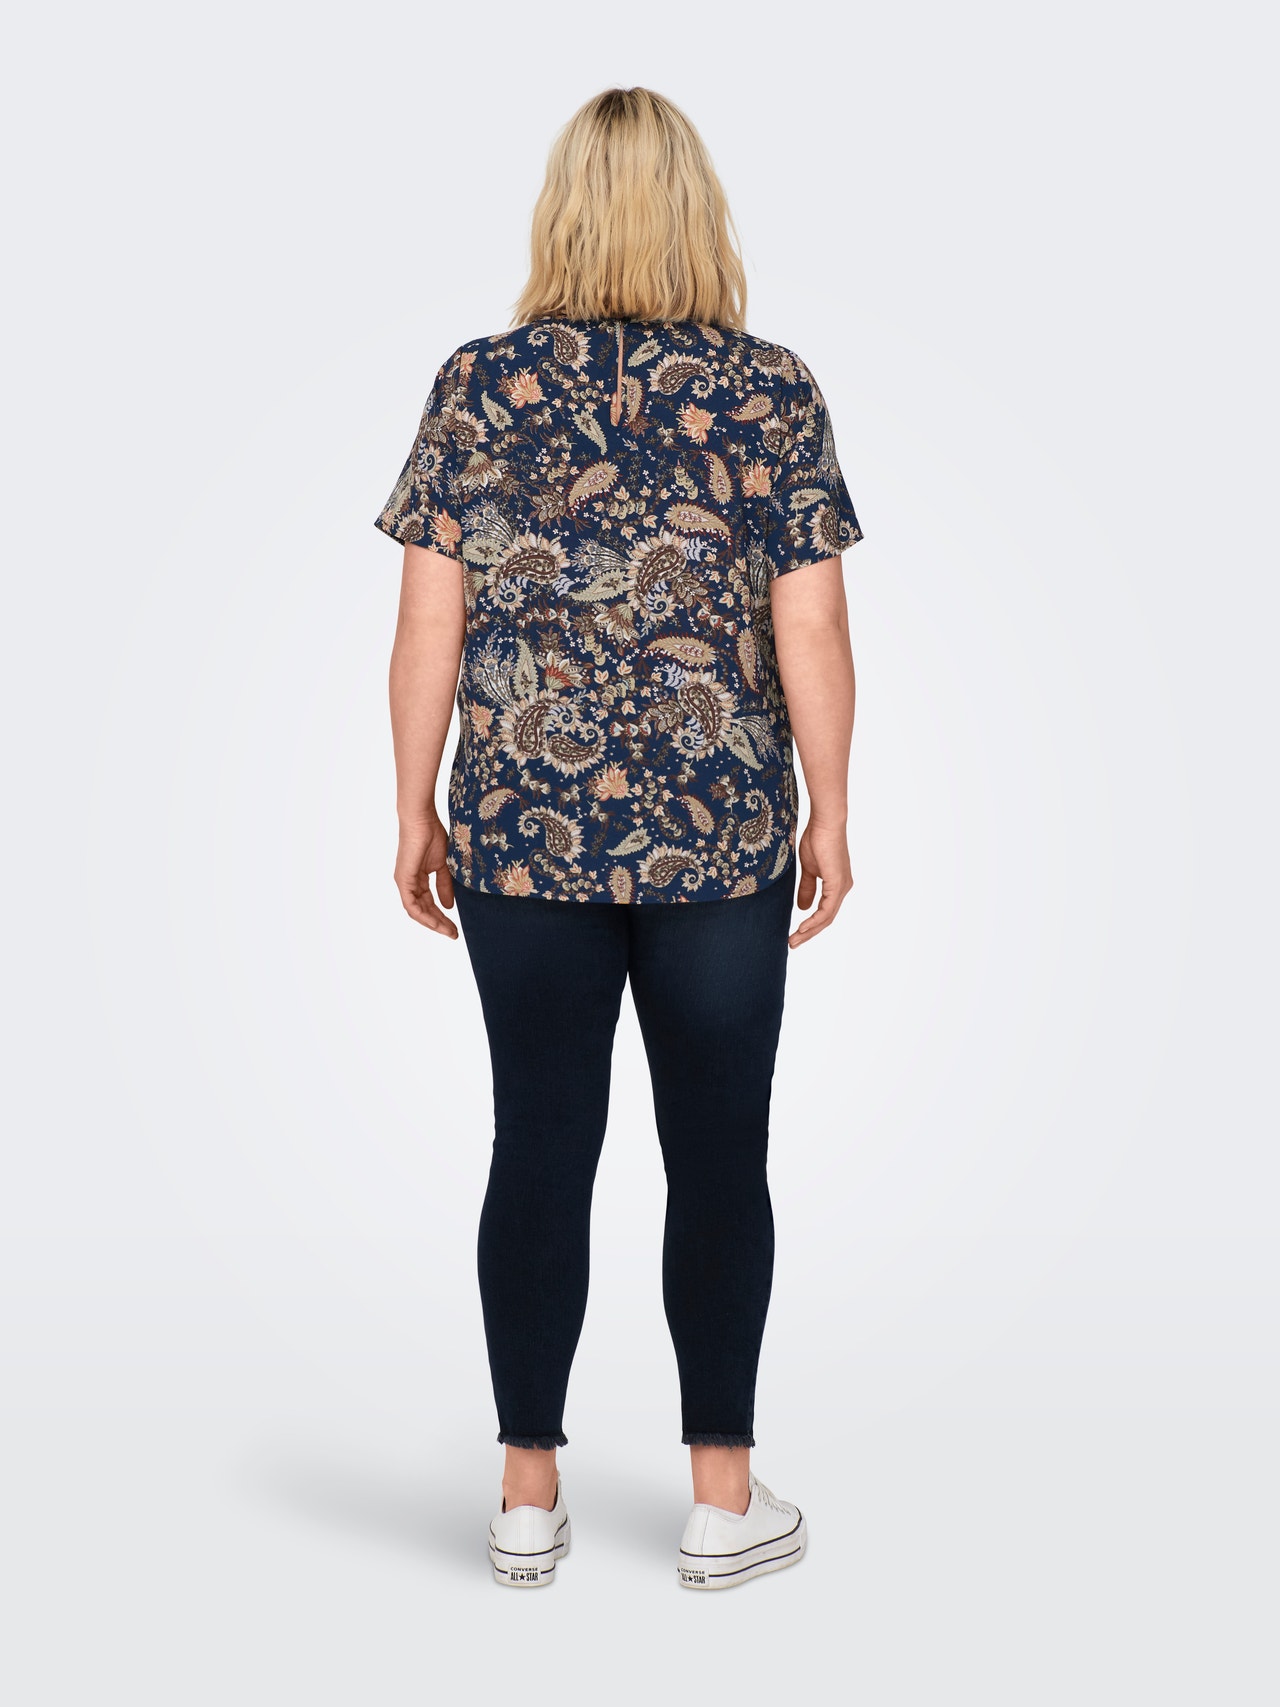 ONLY Curvy printed top -Twilight Blue - 15300676